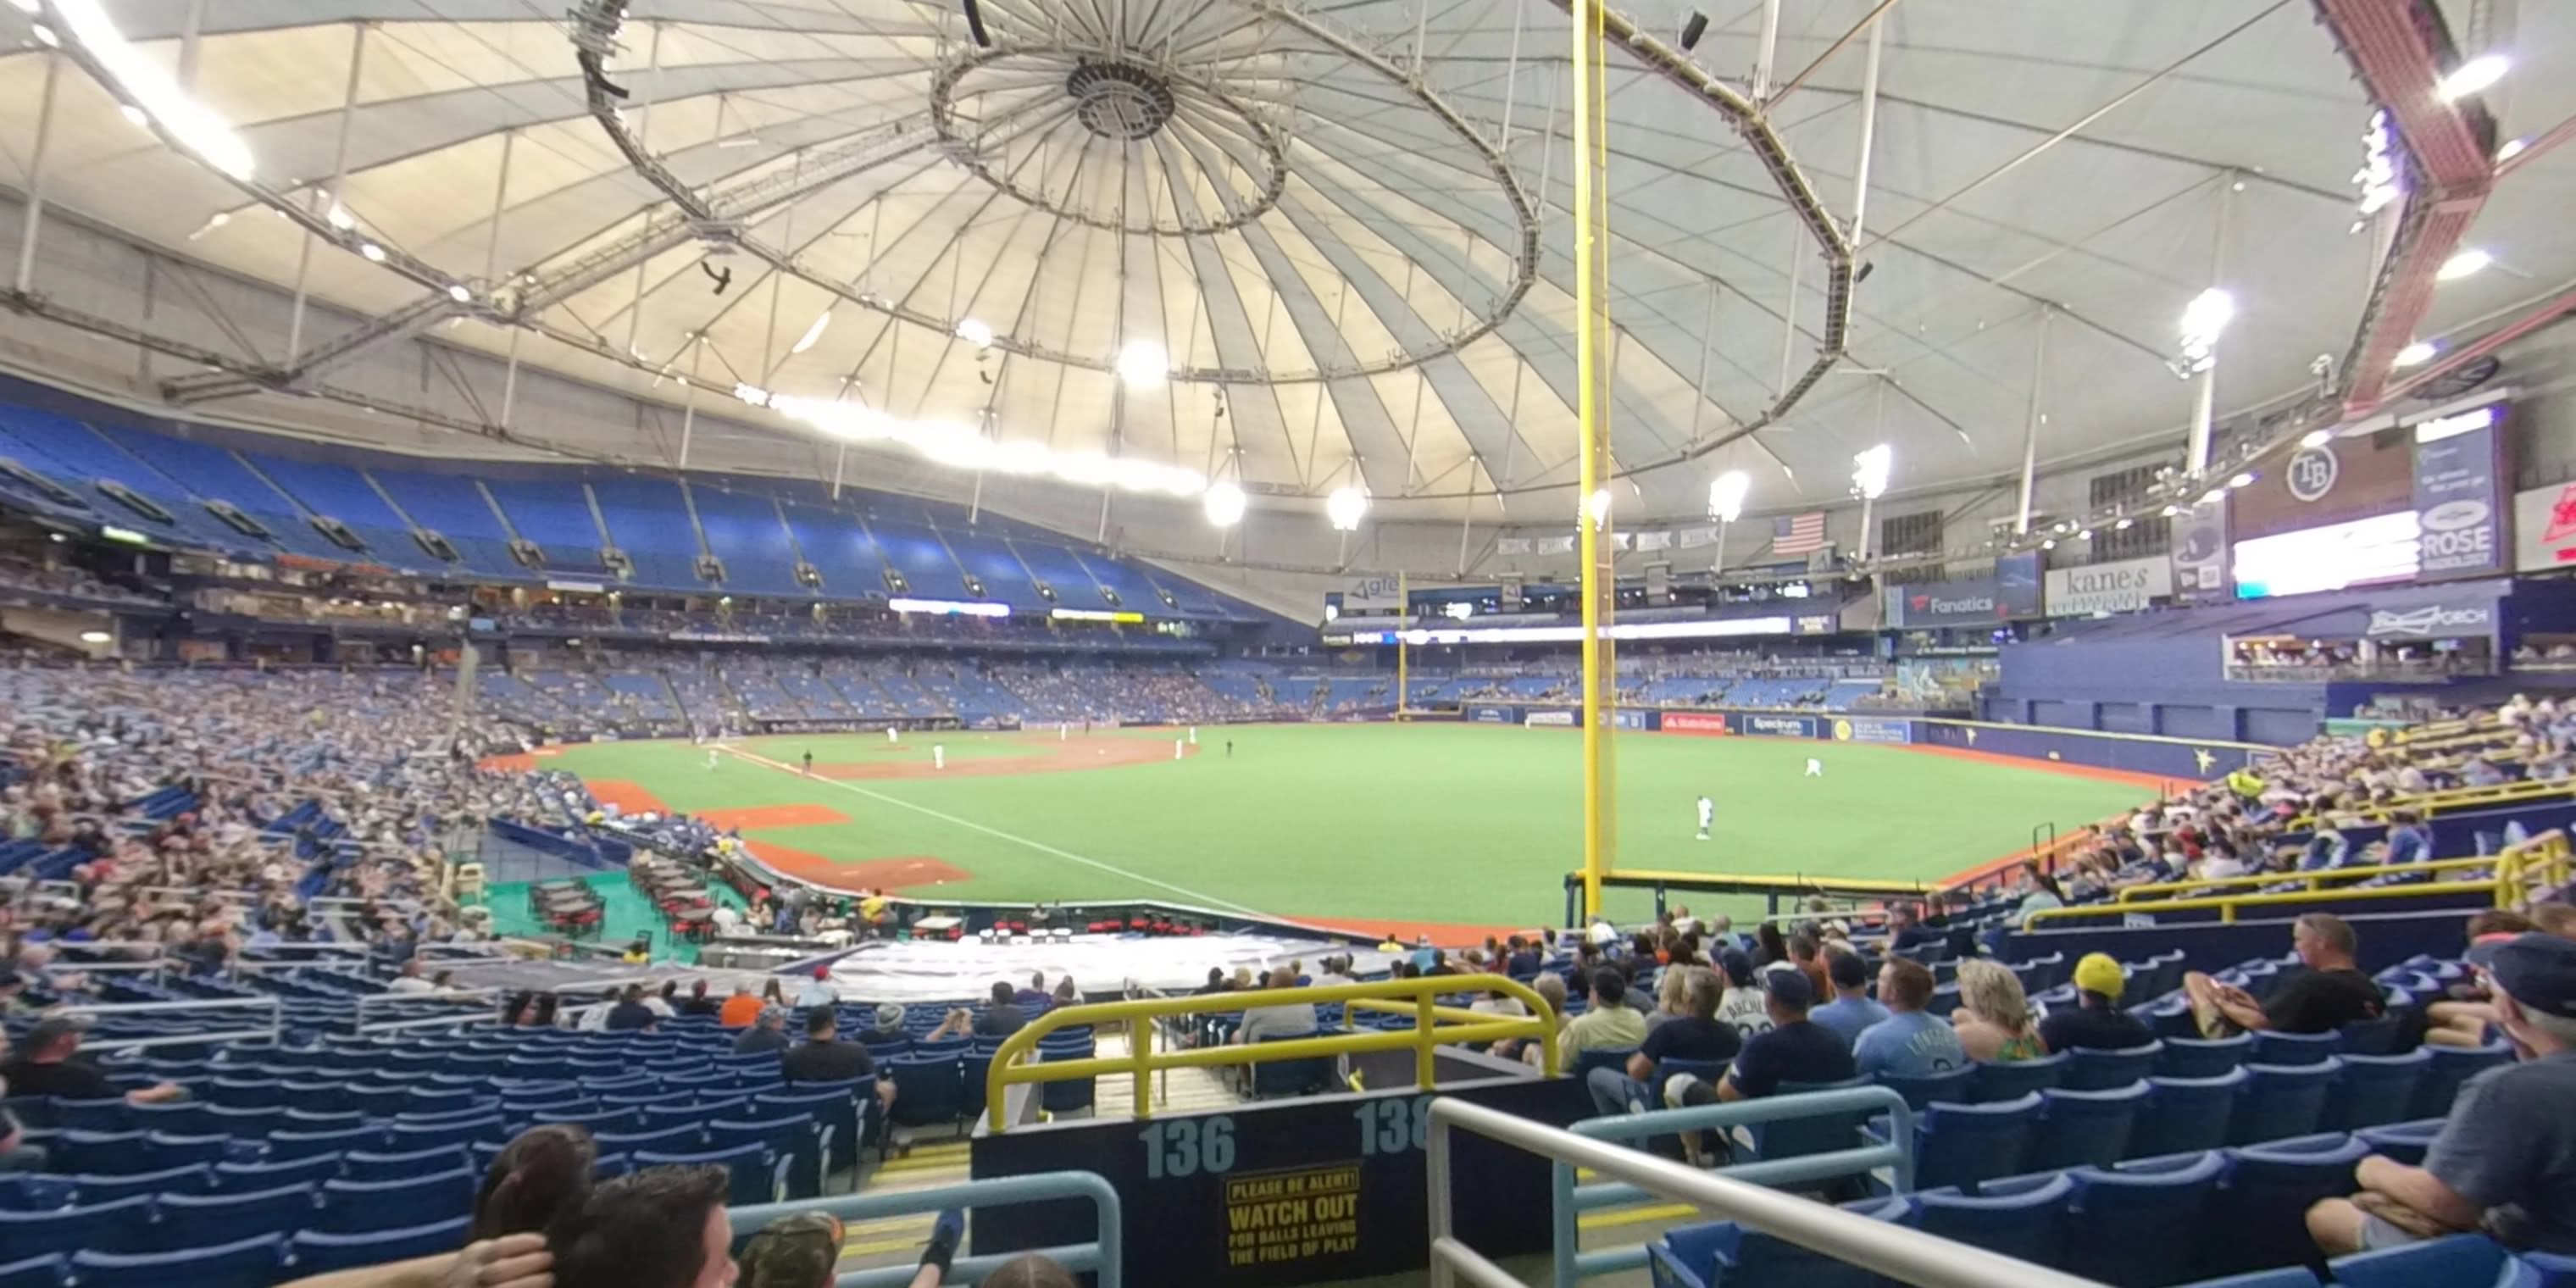 section 138 panoramic seat view  for baseball - tropicana field